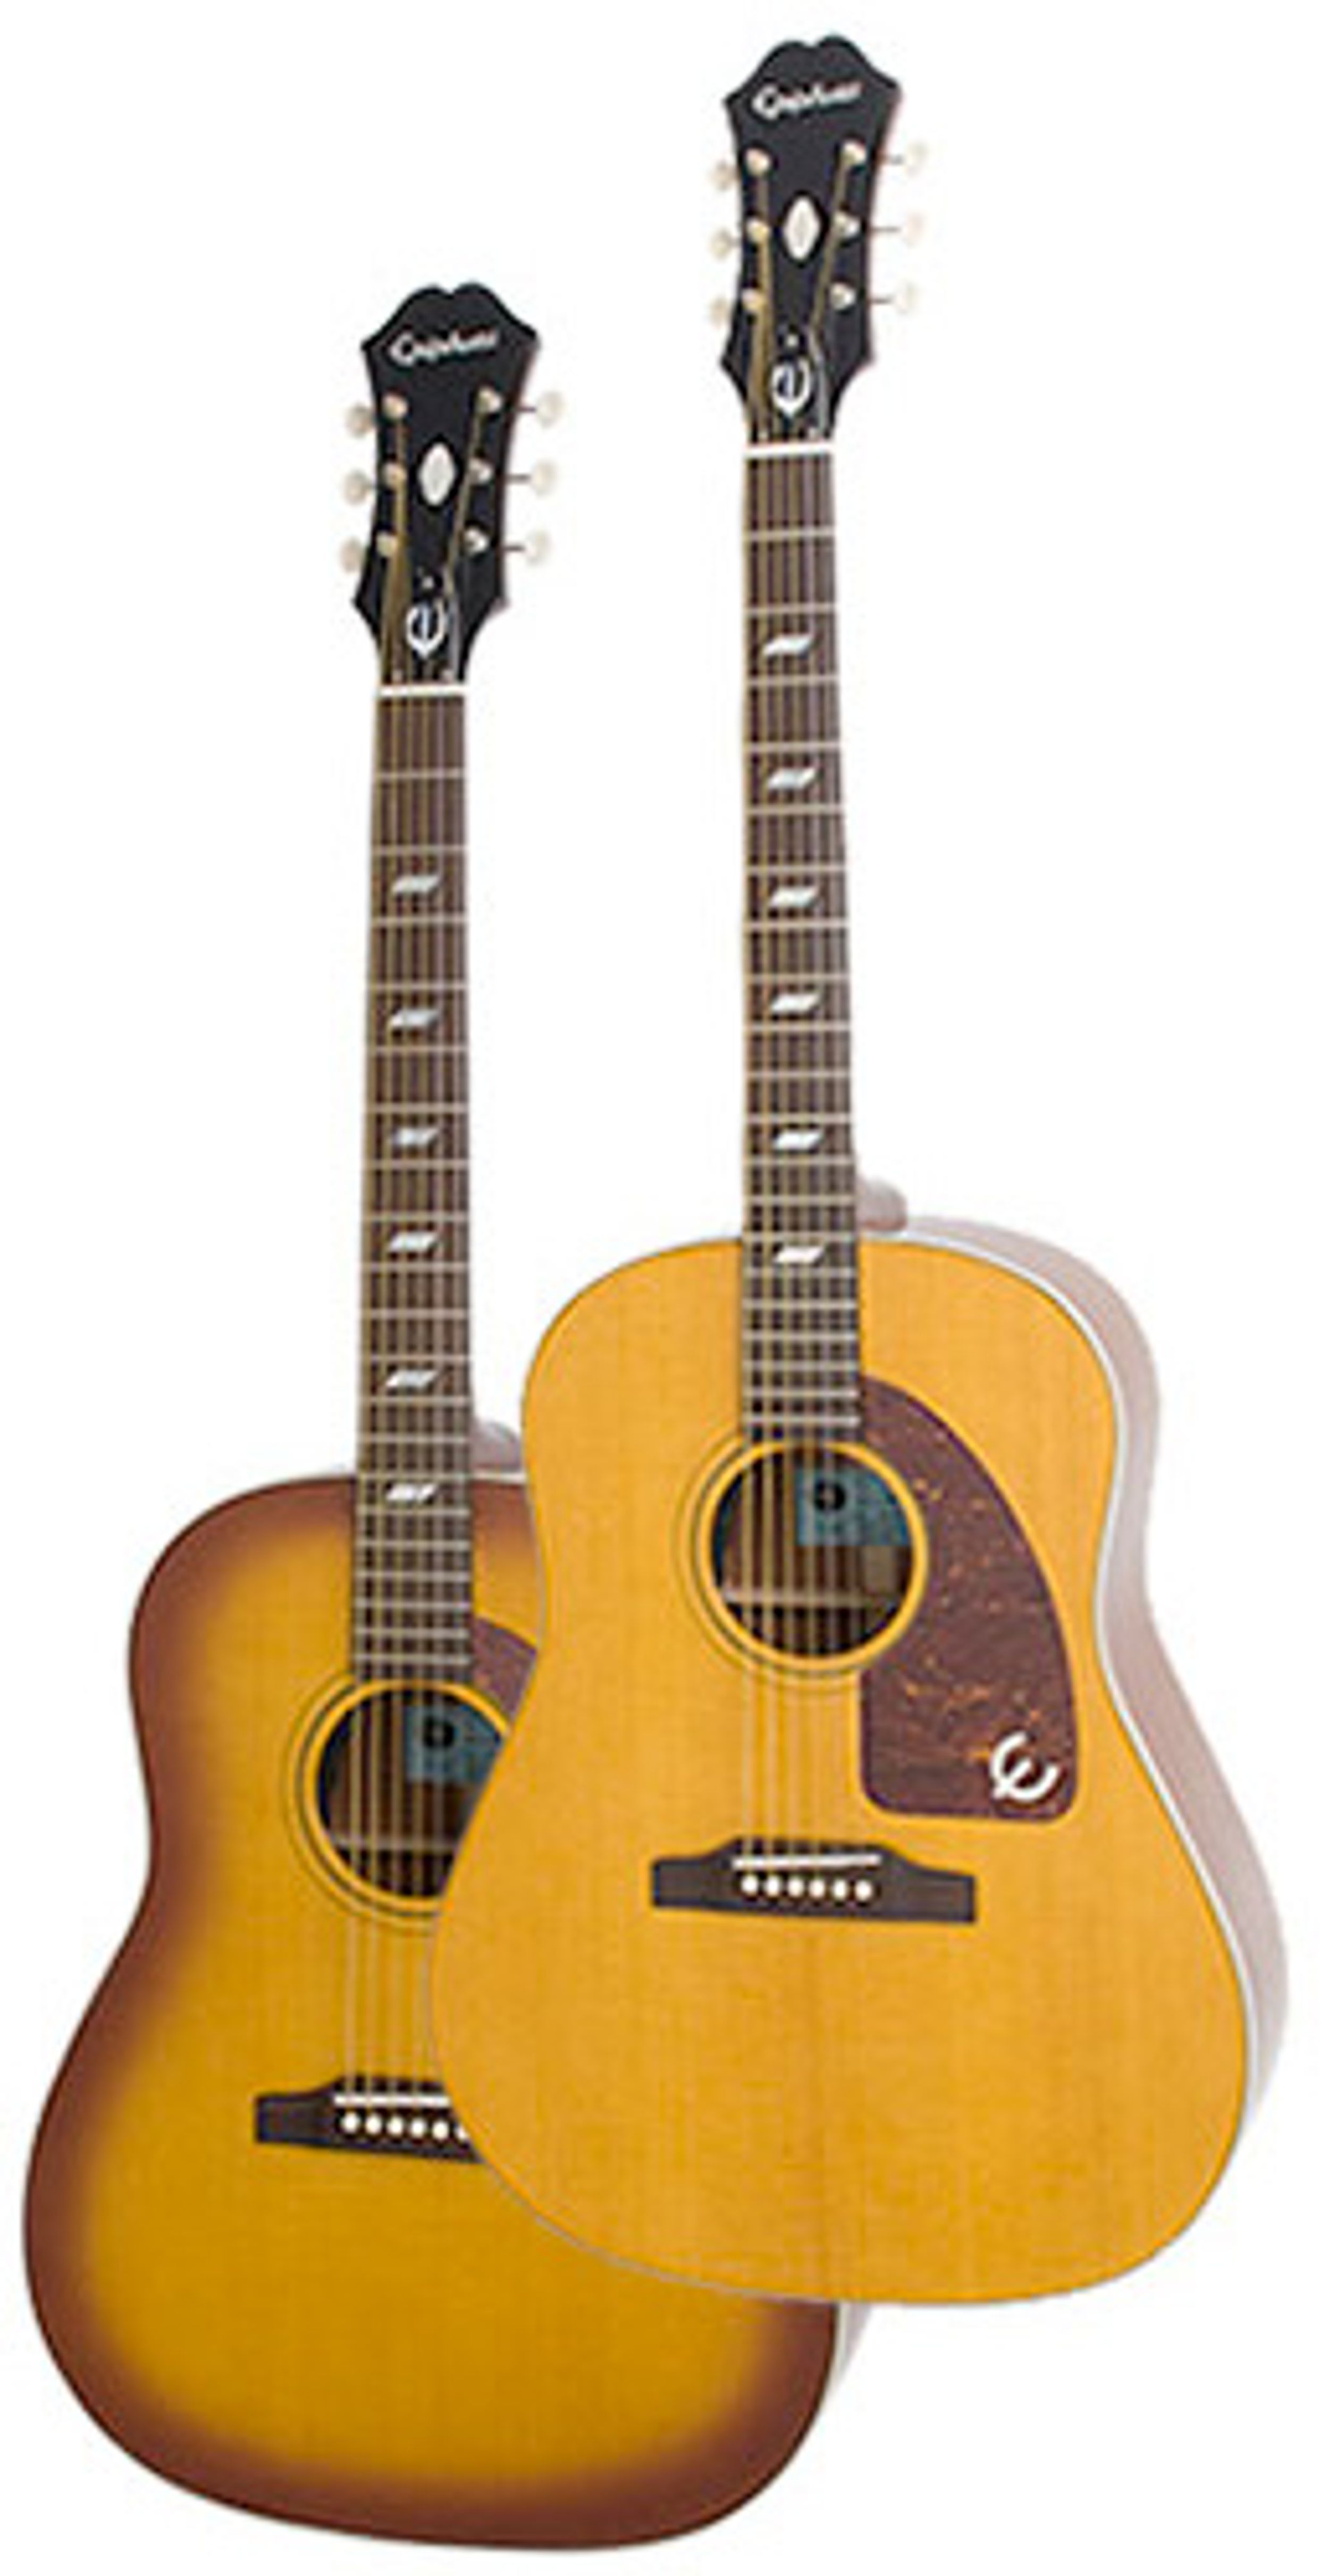 Epiphone Releases “Inspired By” 1964 Texan Acoustic/Electric